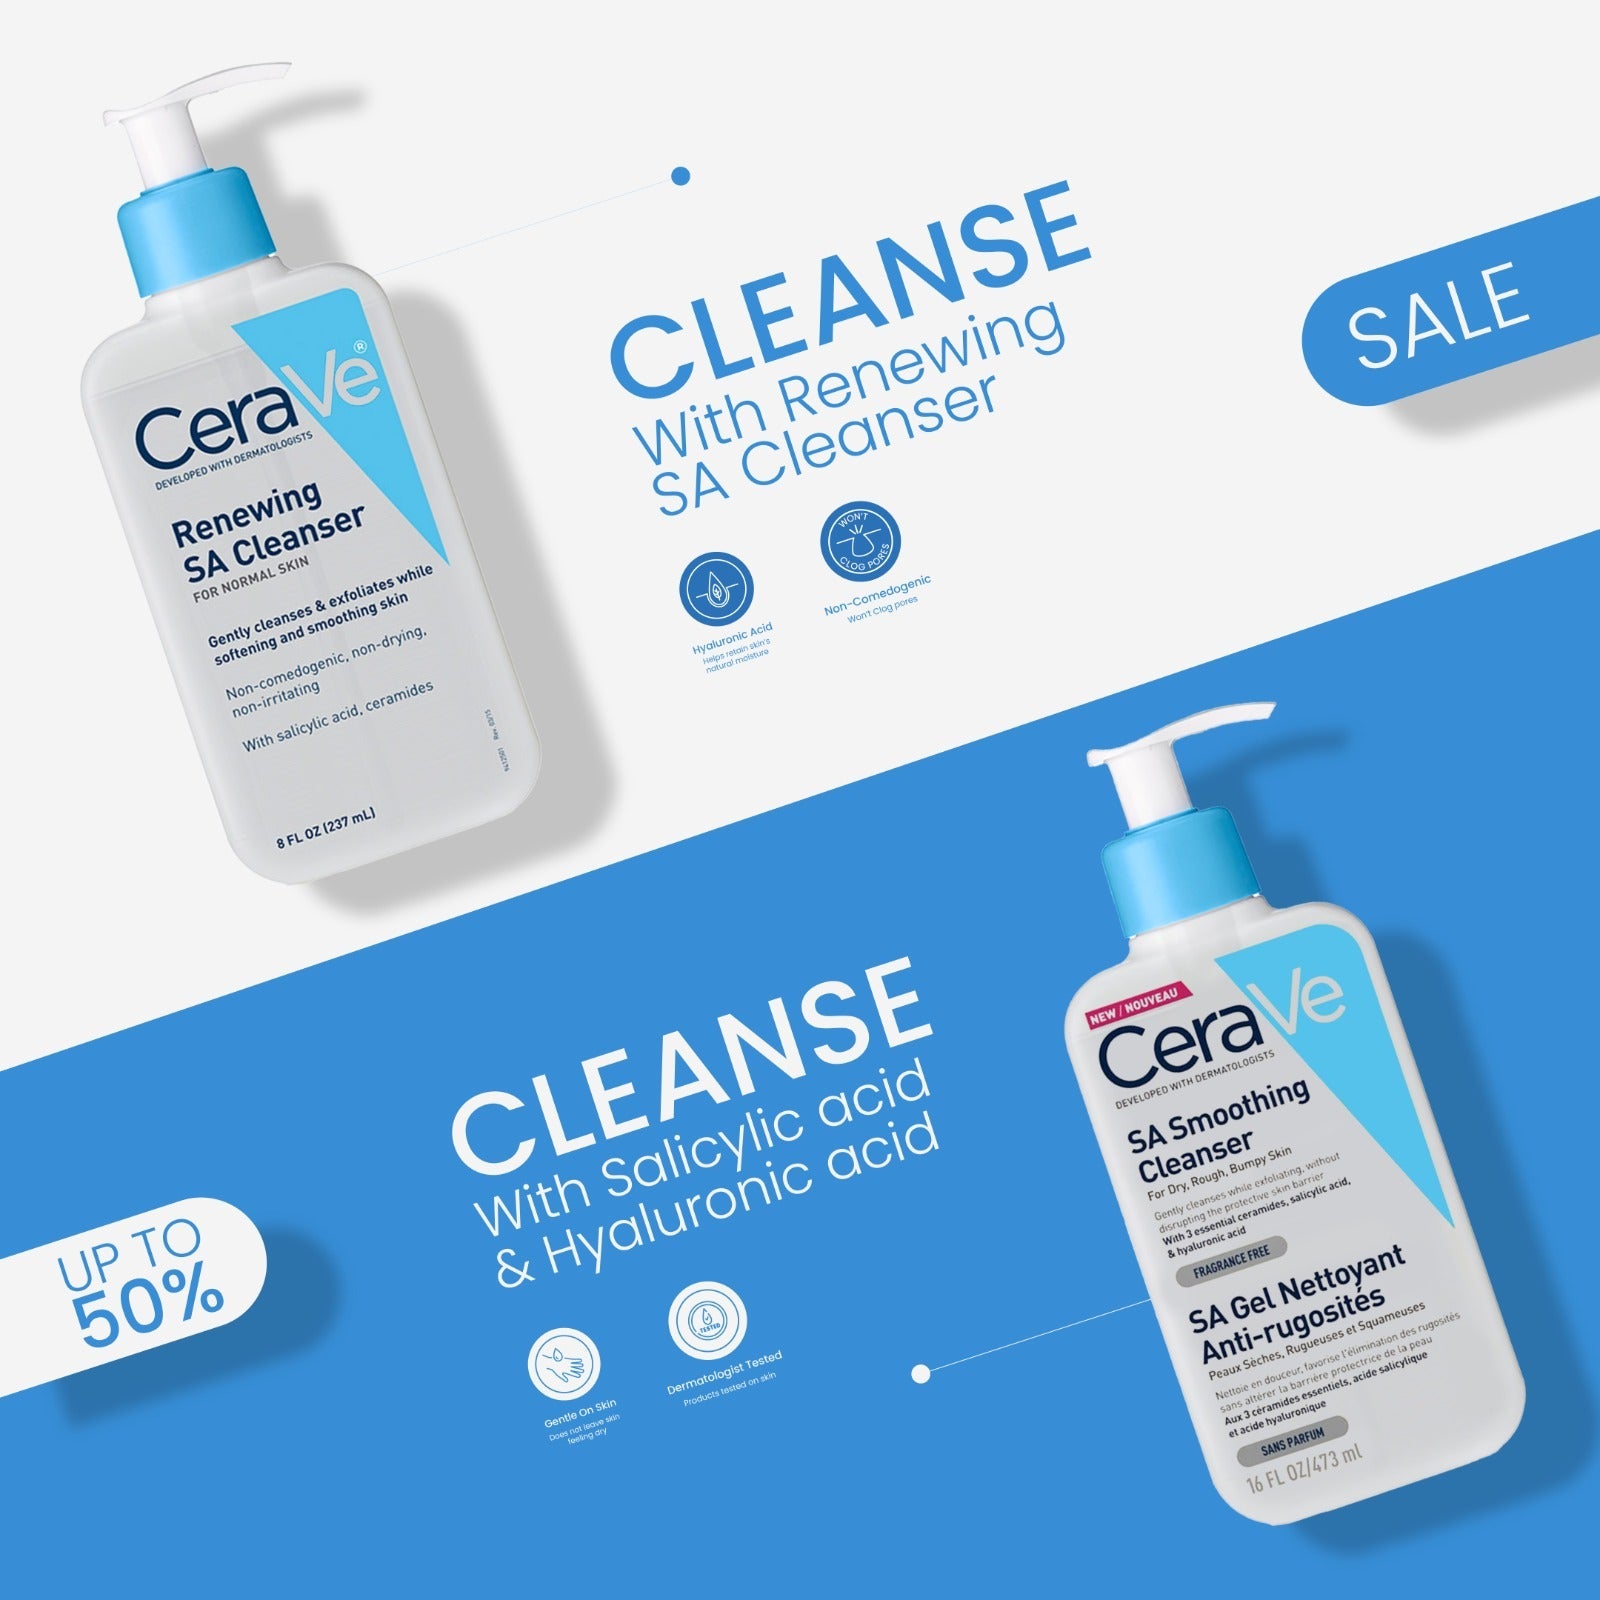 CERAVE RENEWING SA CLEANSER & SA SMOOTHING CLEANSER